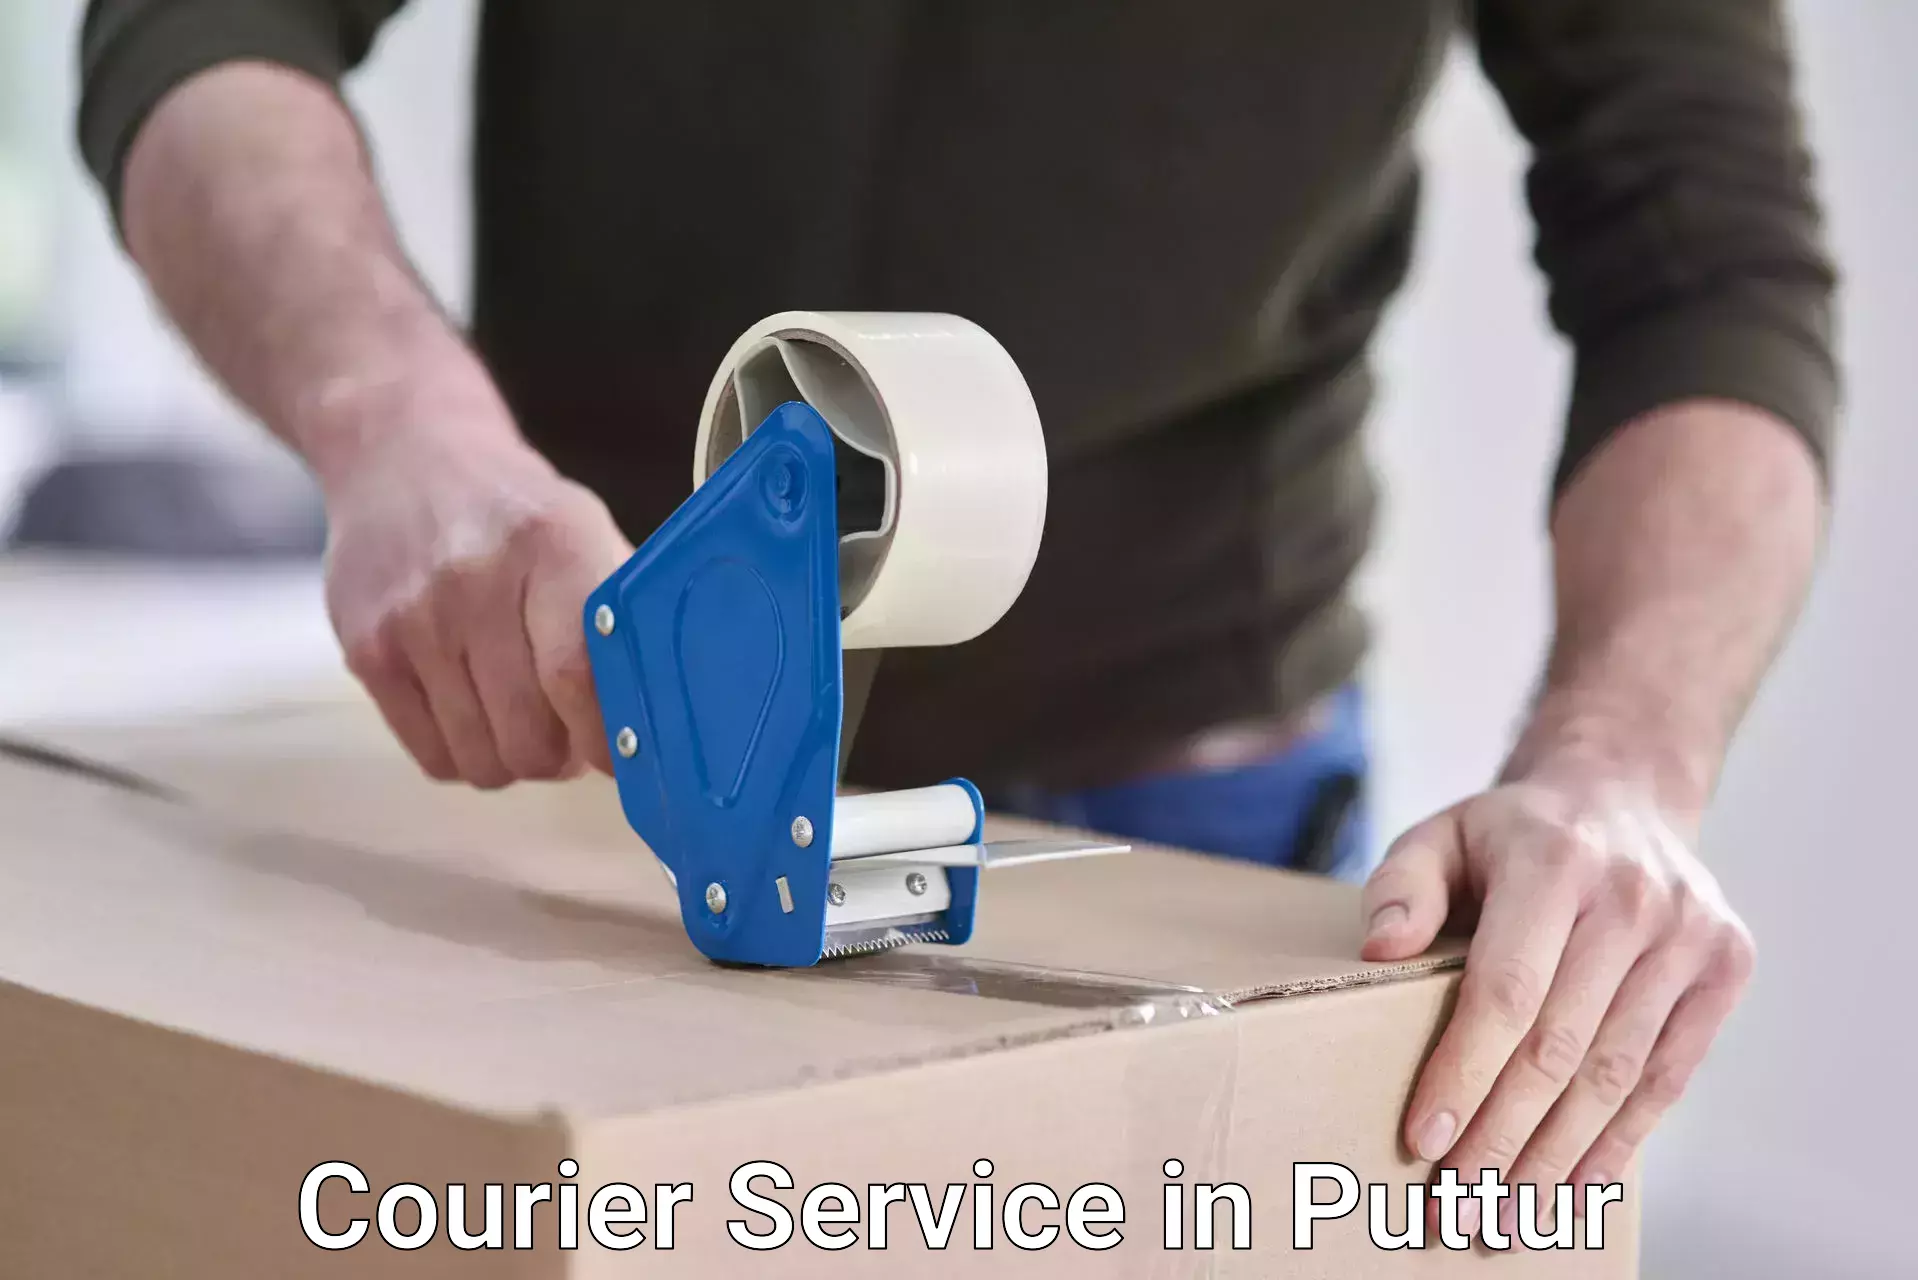 Courier service partnerships in Puttur